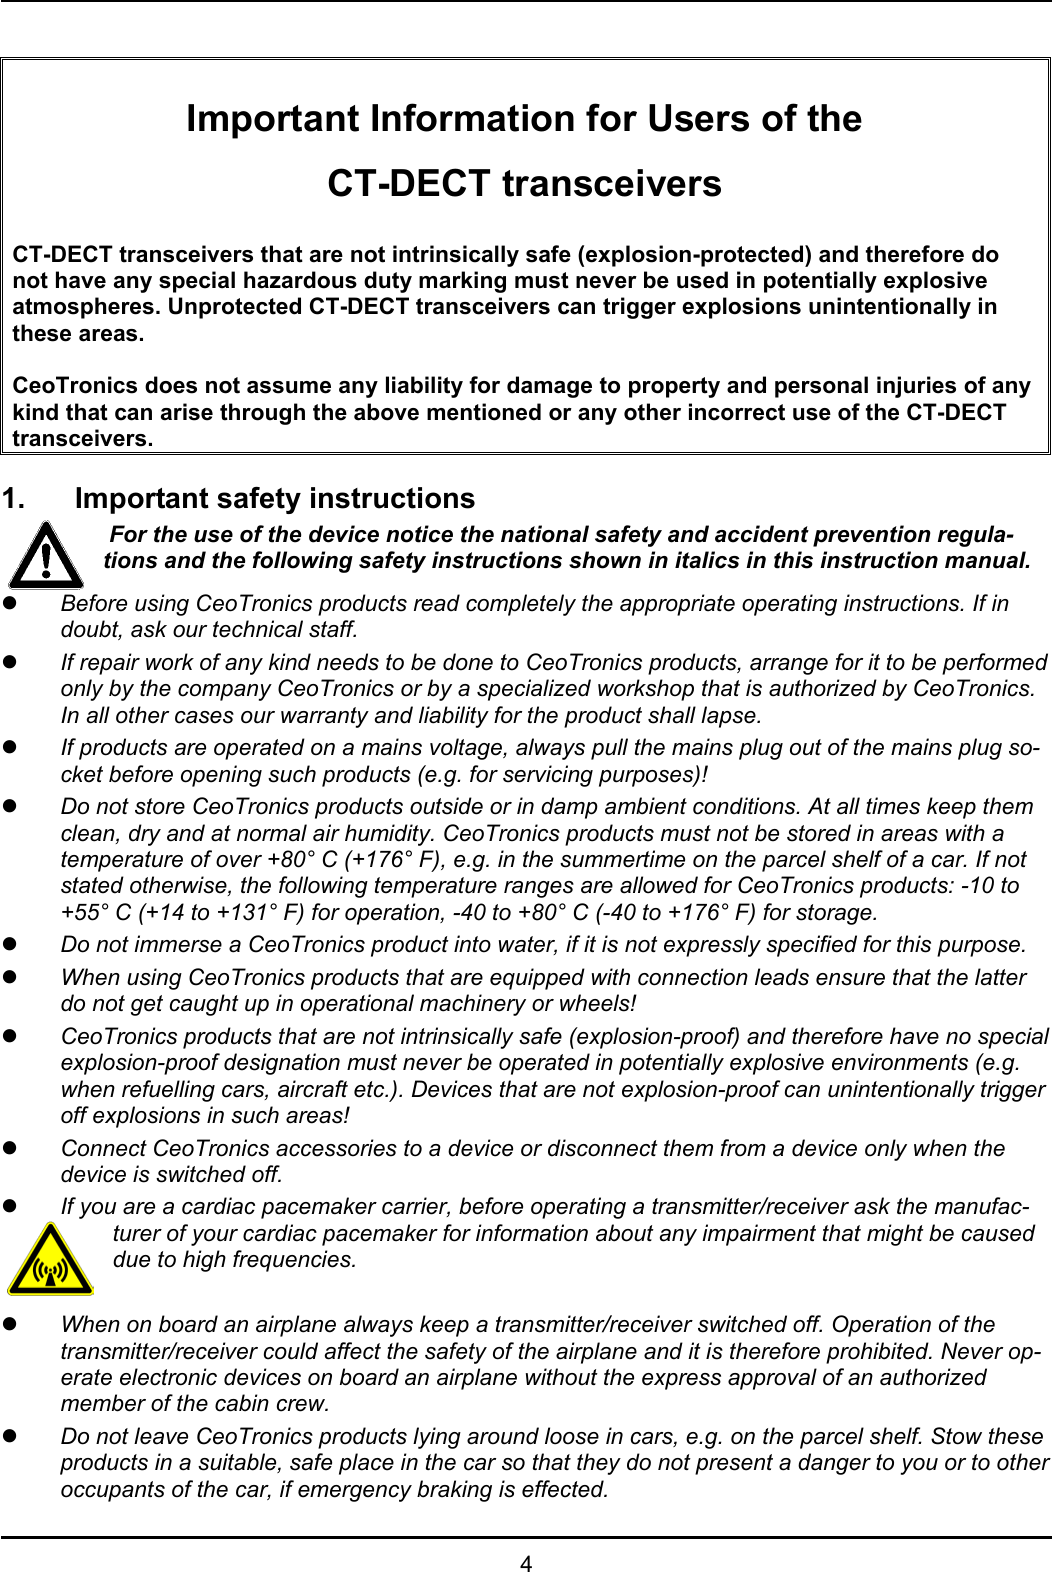   4   Important Information for Users of the CT-DECT transceivers  CT-DECT transceivers that are not intrinsically safe (explosion-protected) and therefore do not have any special hazardous duty marking must never be used in potentially explosive atmospheres. Unprotected CT-DECT transceivers can trigger explosions unintentionally in these areas.  CeoTronics does not assume any liability for damage to property and personal injuries of any kind that can arise through the above mentioned or any other incorrect use of the CT-DECT transceivers.  1.  Important safety instructions  For the use of the device notice the national safety and accident prevention regula-tions and the following safety instructions shown in italics in this instruction manual. z Before using CeoTronics products read completely the appropriate operating instructions. If in doubt, ask our technical staff. z If repair work of any kind needs to be done to CeoTronics products, arrange for it to be performed only by the company CeoTronics or by a specialized workshop that is authorized by CeoTronics. In all other cases our warranty and liability for the product shall lapse. z If products are operated on a mains voltage, always pull the mains plug out of the mains plug so-cket before opening such products (e.g. for servicing purposes)! z Do not store CeoTronics products outside or in damp ambient conditions. At all times keep them clean, dry and at normal air humidity. CeoTronics products must not be stored in areas with a temperature of over +80° C (+176° F), e.g. in the summertime on the parcel shelf of a car. If not stated otherwise, the following temperature ranges are allowed for CeoTronics products: -10 to +55° C (+14 to +131° F) for operation, -40 to +80° C (-40 to +176° F) for storage. z Do not immerse a CeoTronics product into water, if it is not expressly specified for this purpose. z When using CeoTronics products that are equipped with connection leads ensure that the latter do not get caught up in operational machinery or wheels! z CeoTronics products that are not intrinsically safe (explosion-proof) and therefore have no special explosion-proof designation must never be operated in potentially explosive environments (e.g. when refuelling cars, aircraft etc.). Devices that are not explosion-proof can unintentionally trigger off explosions in such areas! z Connect CeoTronics accessories to a device or disconnect them from a device only when the device is switched off.  z If you are a cardiac pacemaker carrier, before operating a transmitter/receiver ask the manufac-turer of your cardiac pacemaker for information about any impairment that might be caused due to high frequencies.  z When on board an airplane always keep a transmitter/receiver switched off. Operation of the transmitter/receiver could affect the safety of the airplane and it is therefore prohibited. Never op-erate electronic devices on board an airplane without the express approval of an authorized member of the cabin crew. z Do not leave CeoTronics products lying around loose in cars, e.g. on the parcel shelf. Stow these products in a suitable, safe place in the car so that they do not present a danger to you or to other occupants of the car, if emergency braking is effected. 